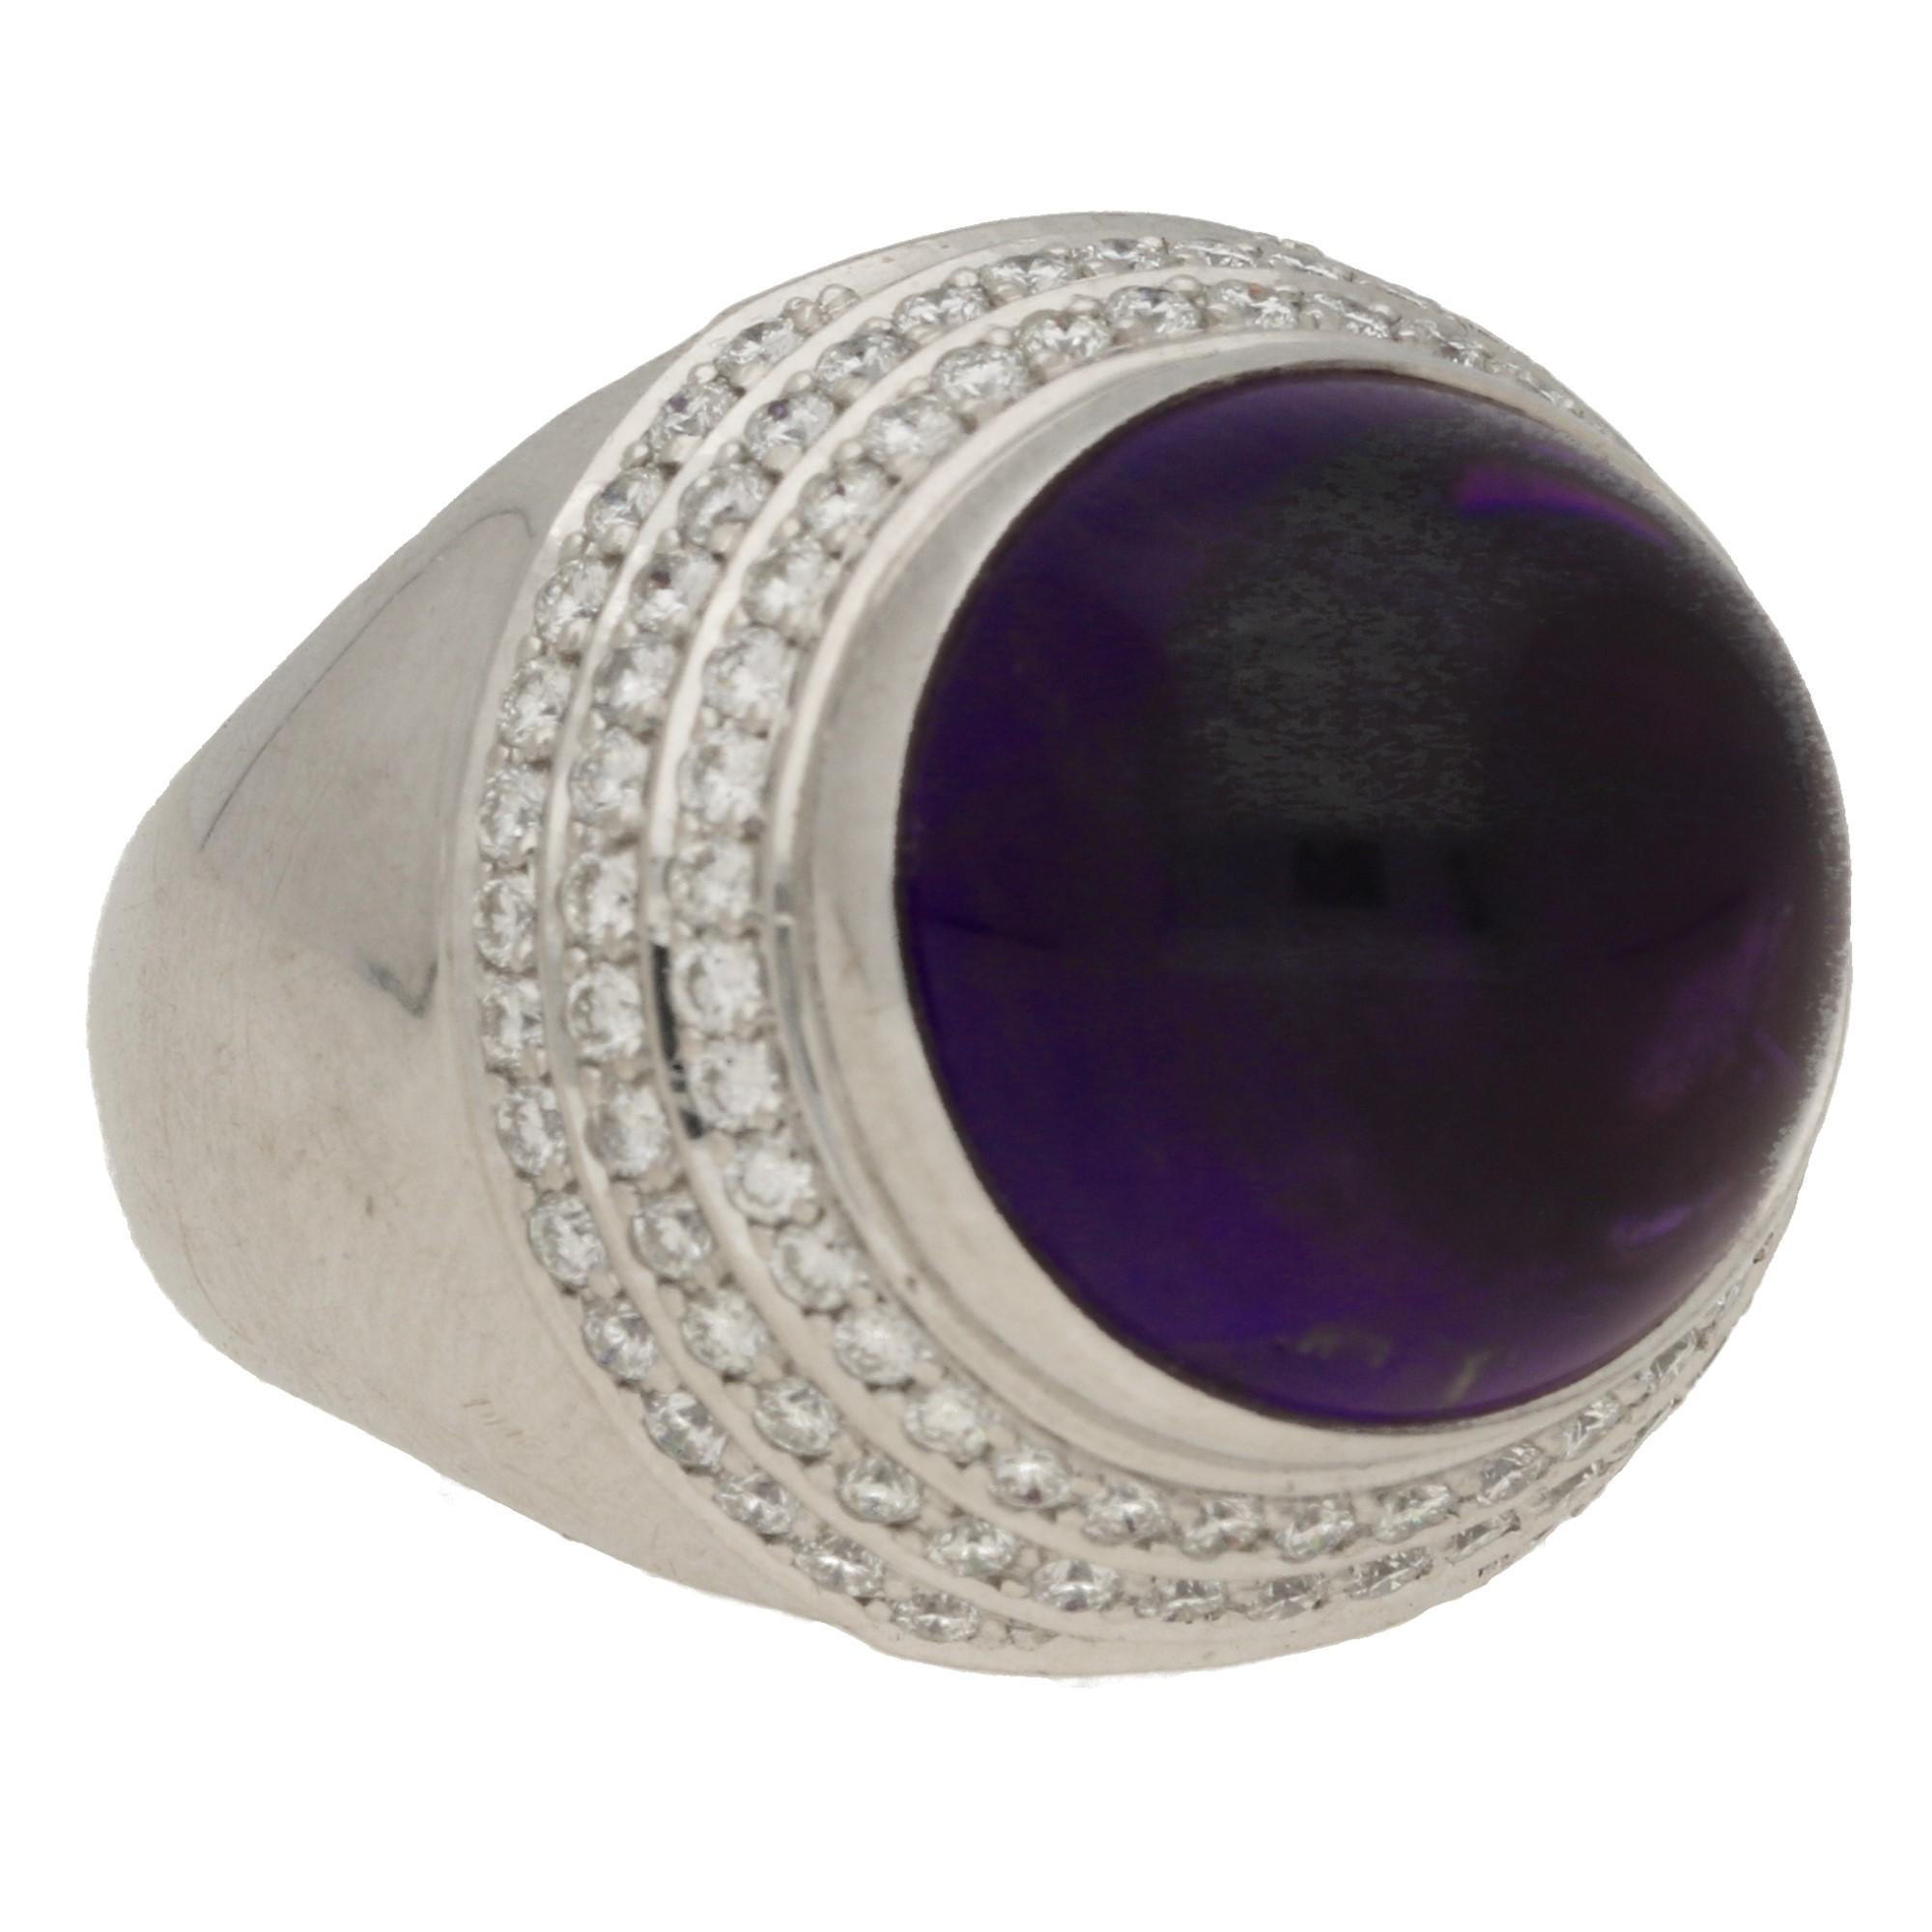 A striking amethyst and diamond cocktail ring set in 18k white gold, signed Theo Fennell.

The piece is predominantly set with a central cabochon amethyst stone which has an approximate carat weight of 12.00 carats. The amethyst is a vibrant purple